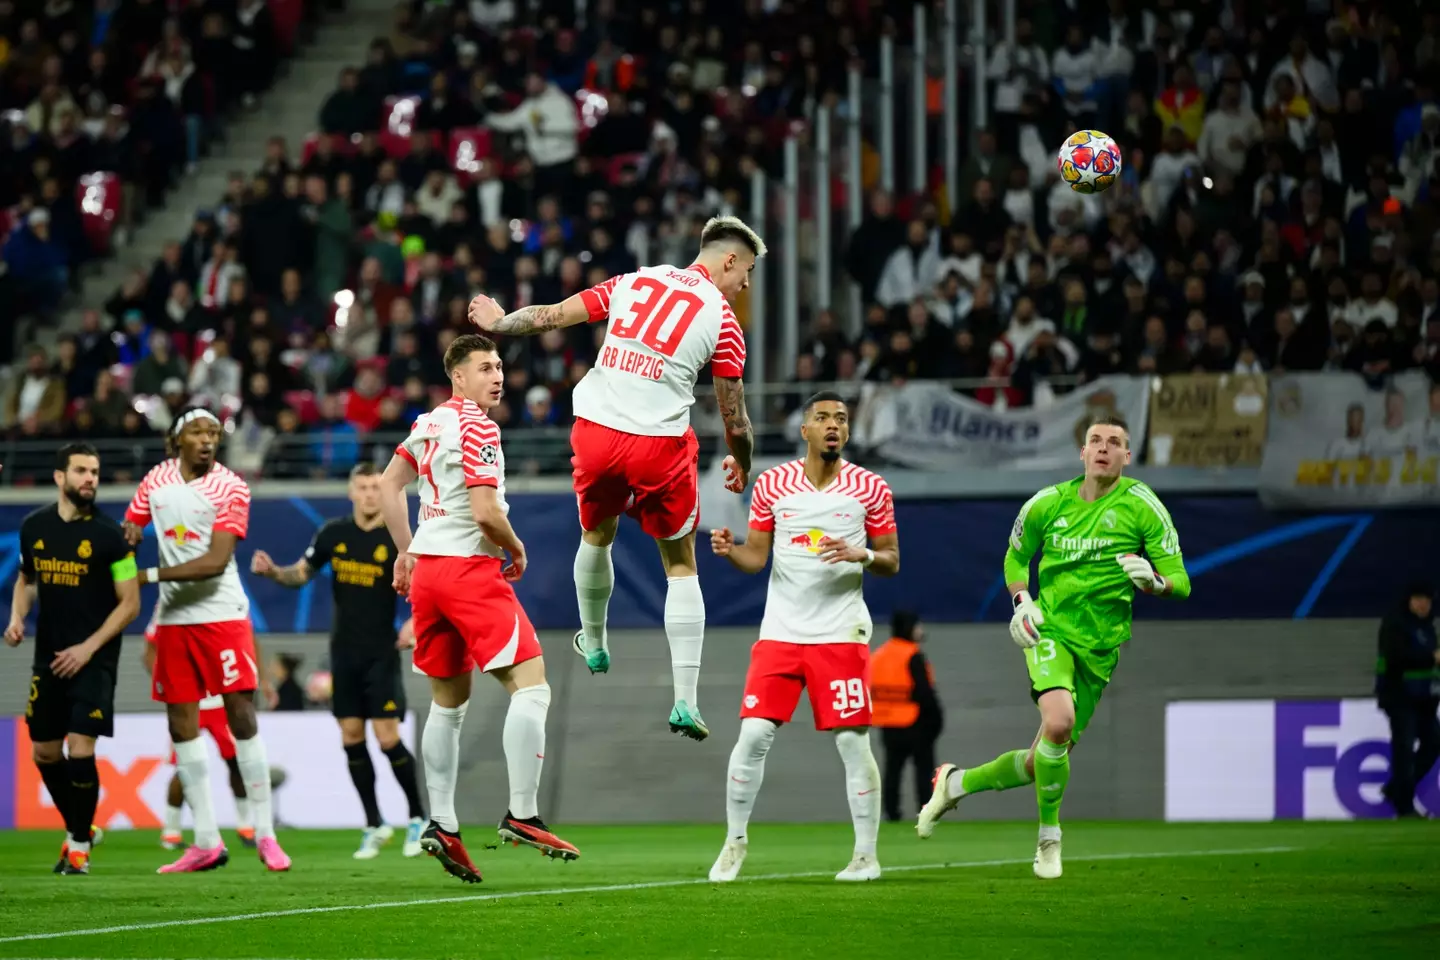 Sesko's early 'goal' was ruled out after a VAR check (